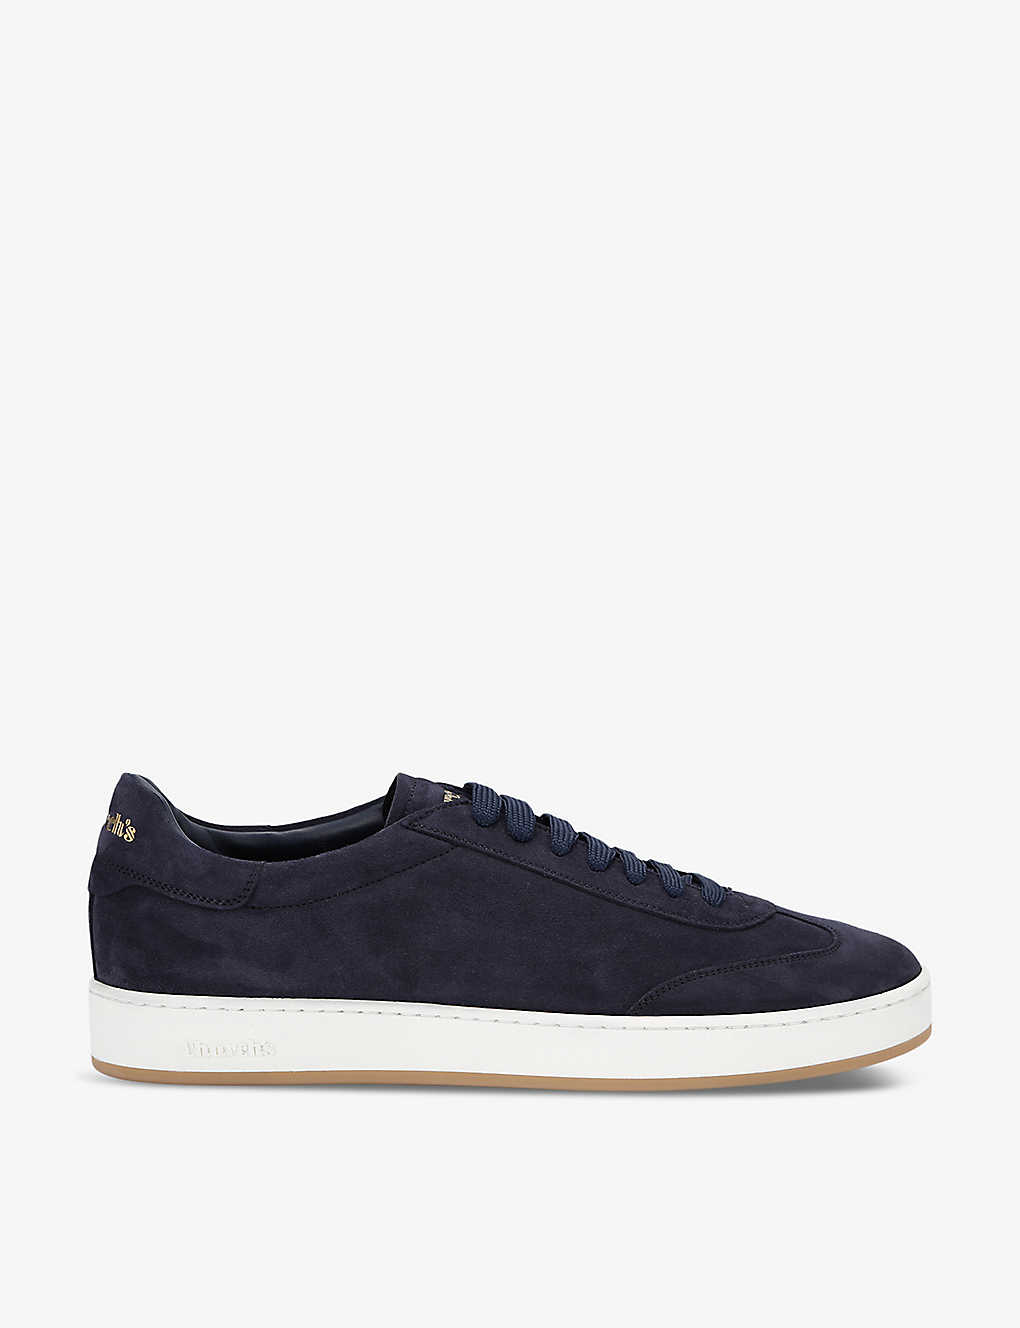 Shop Church Men's Navy Largs Branded Suede Low-top Trainers